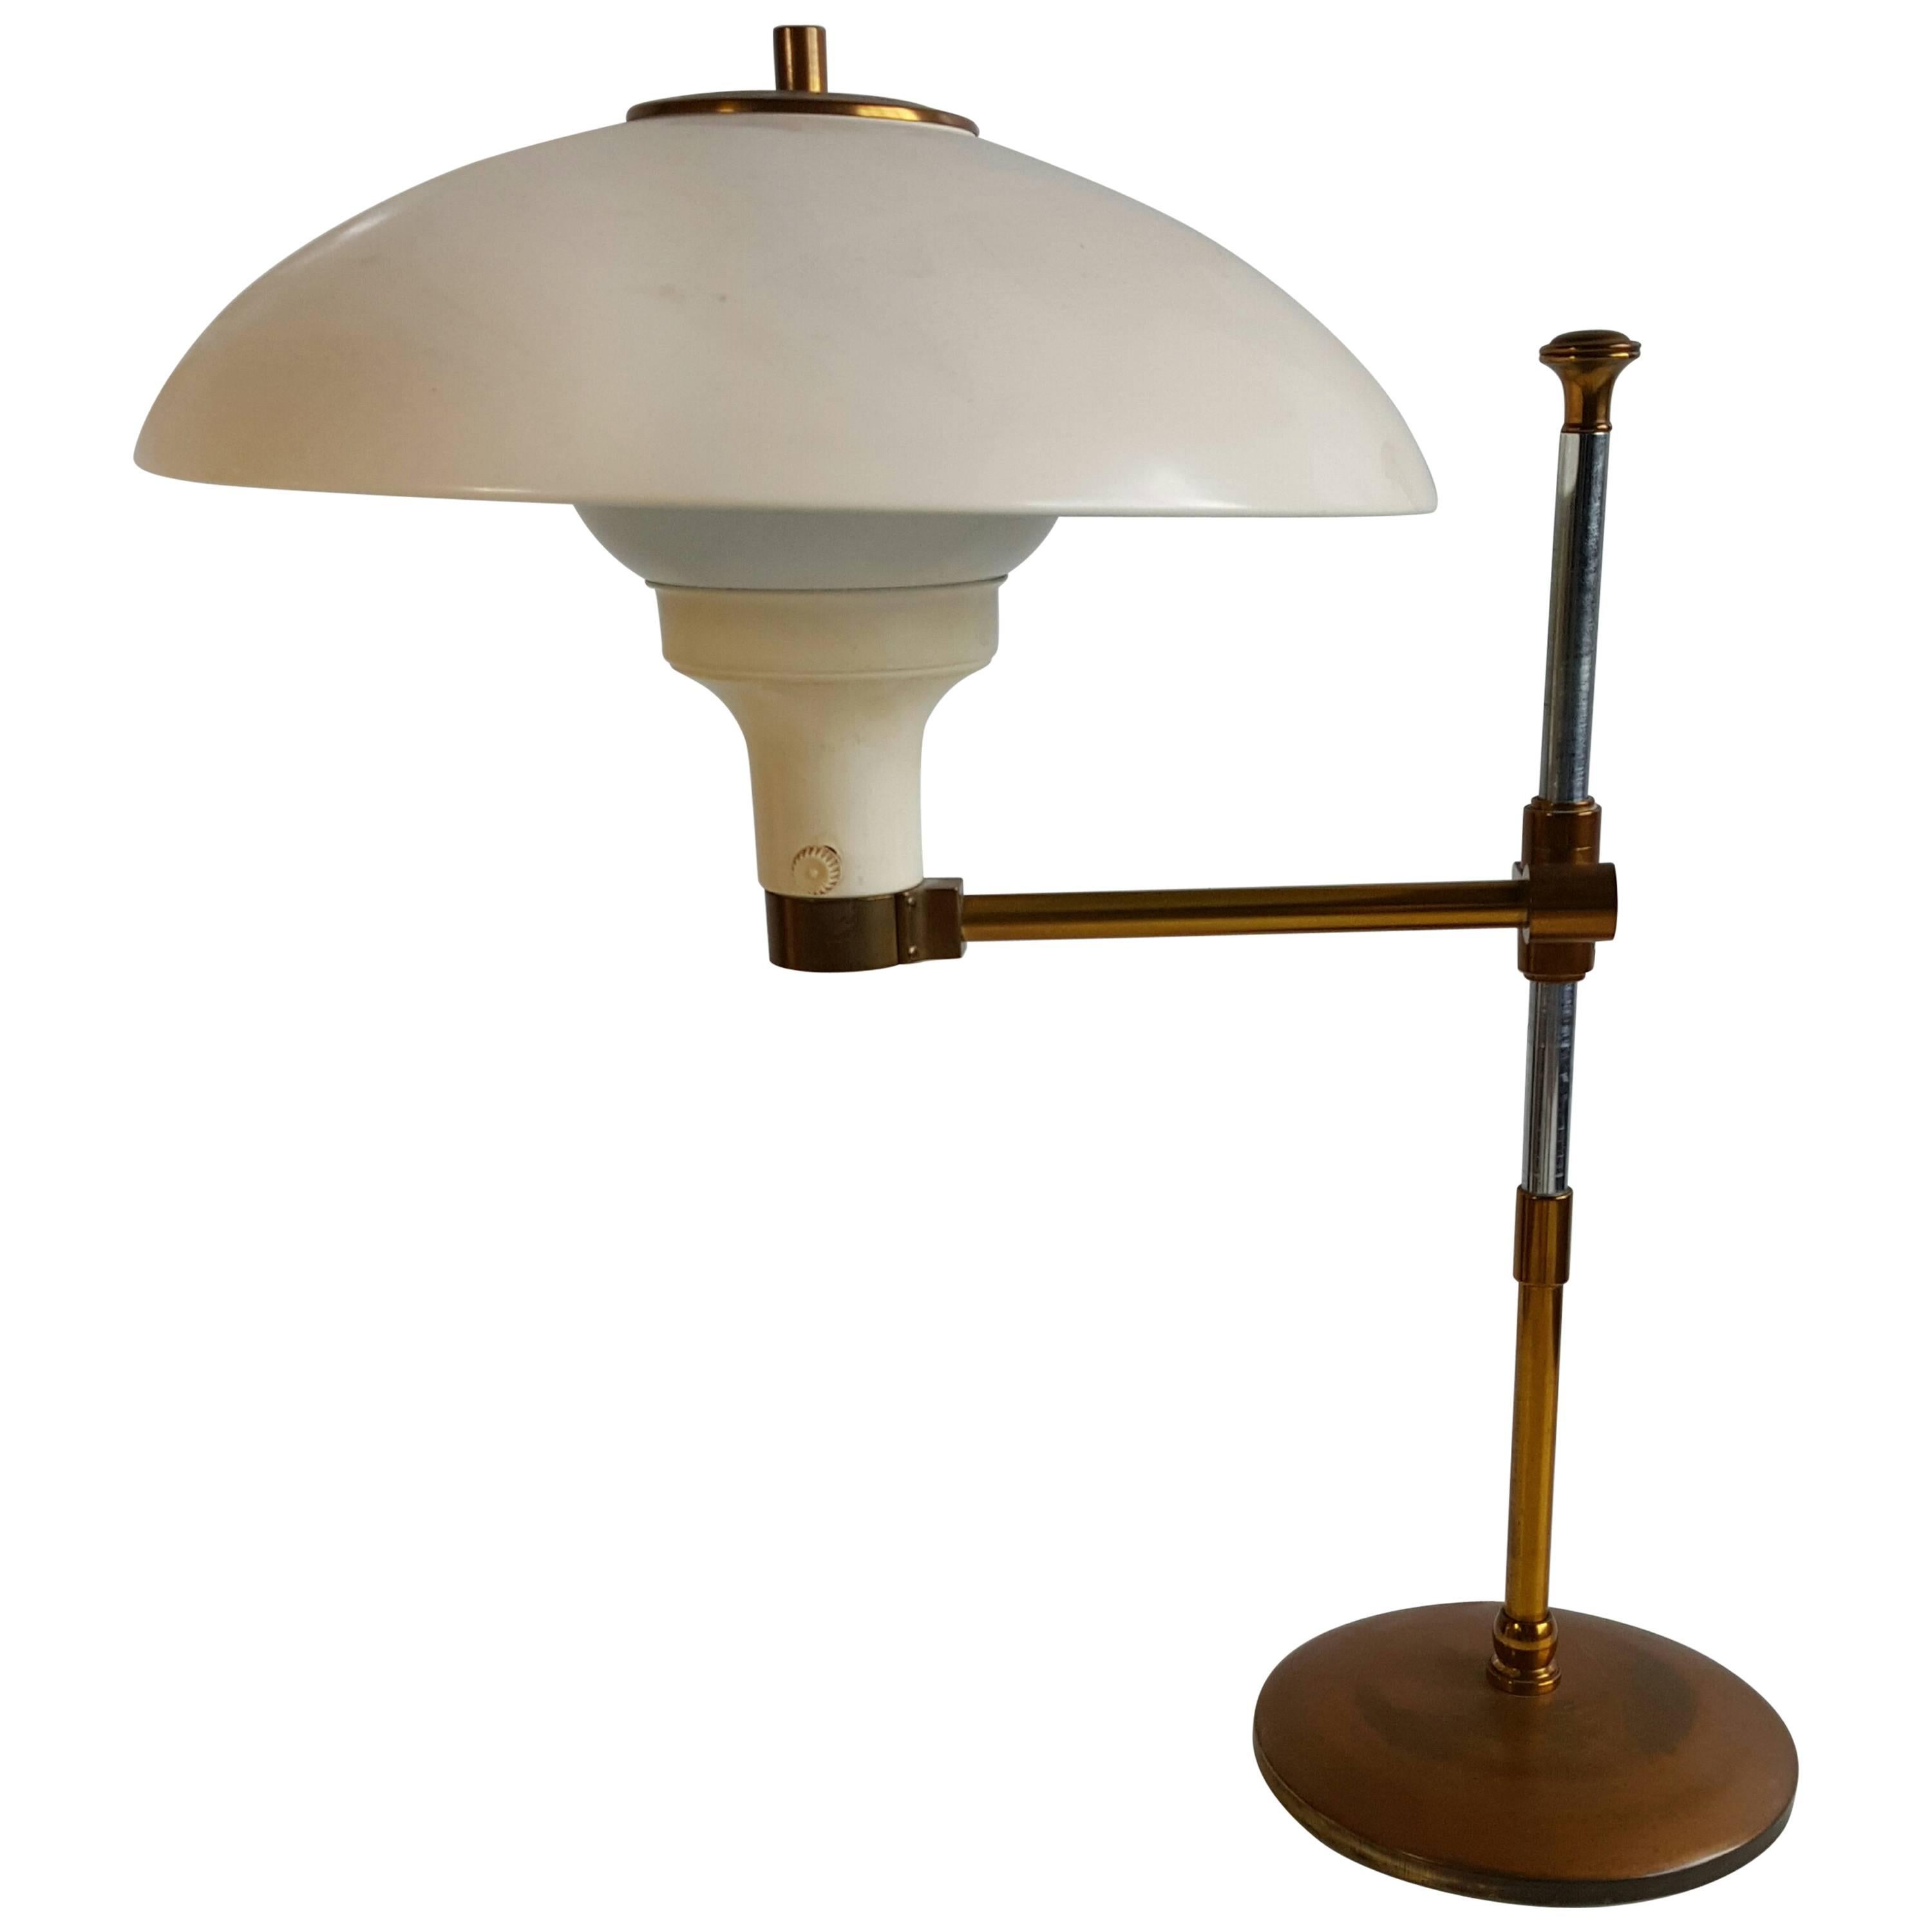 Early Paavo Tynell Adjustable Swing Arm Desk/Table Lamp